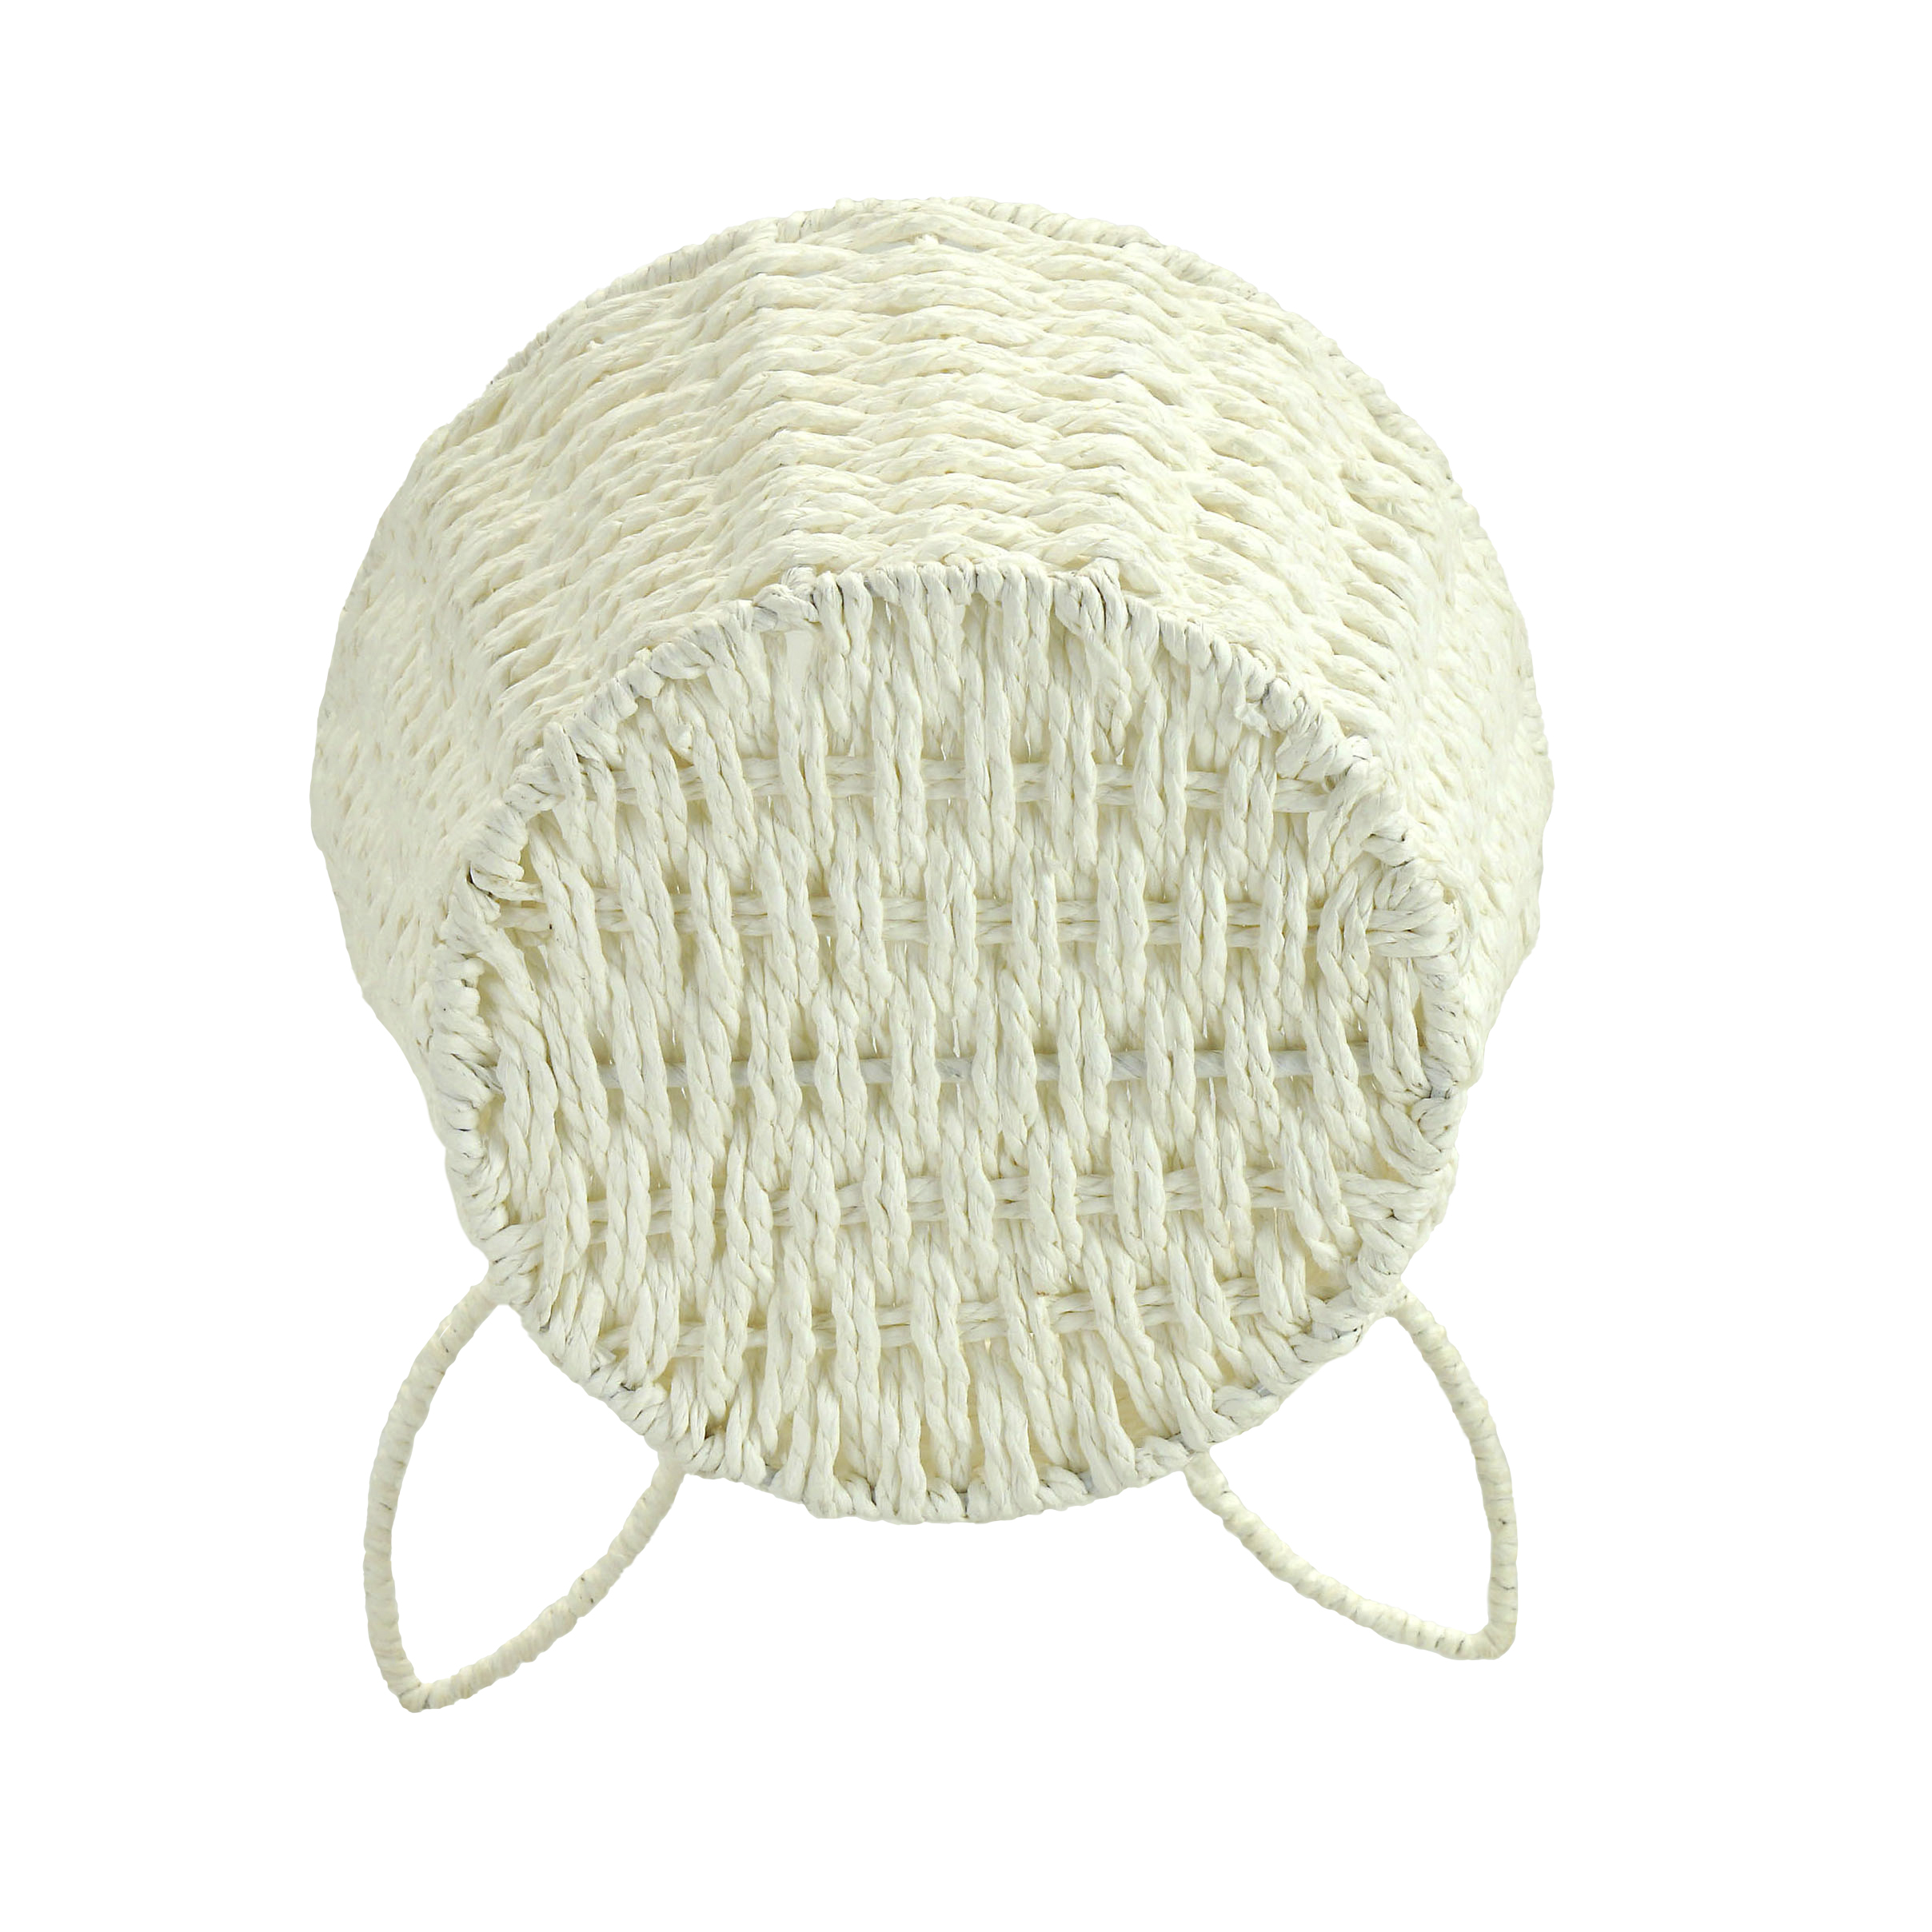 Way to Celebrate Medium Round White Paper Rope Easter Basket with Bunny Handle - image 3 of 11